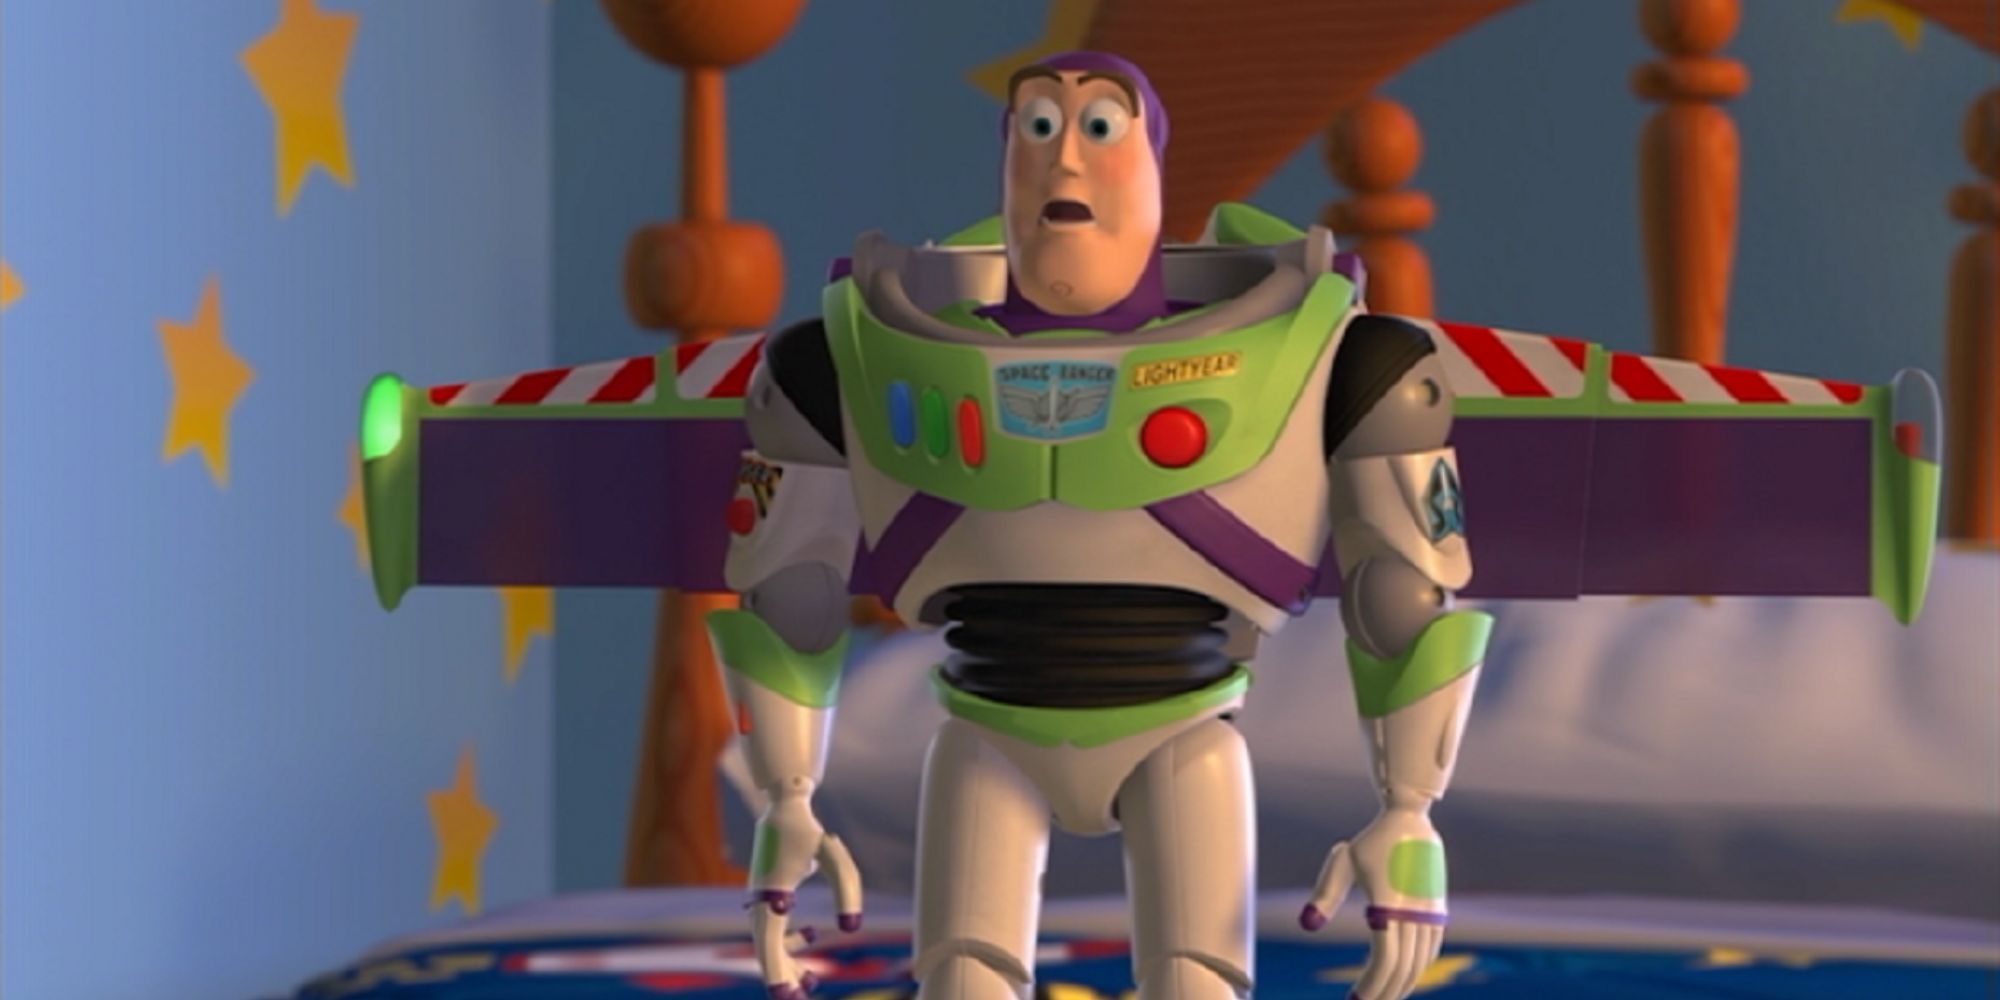 Buzz Lightyear is surprised to grow his wings in Toy Story 2